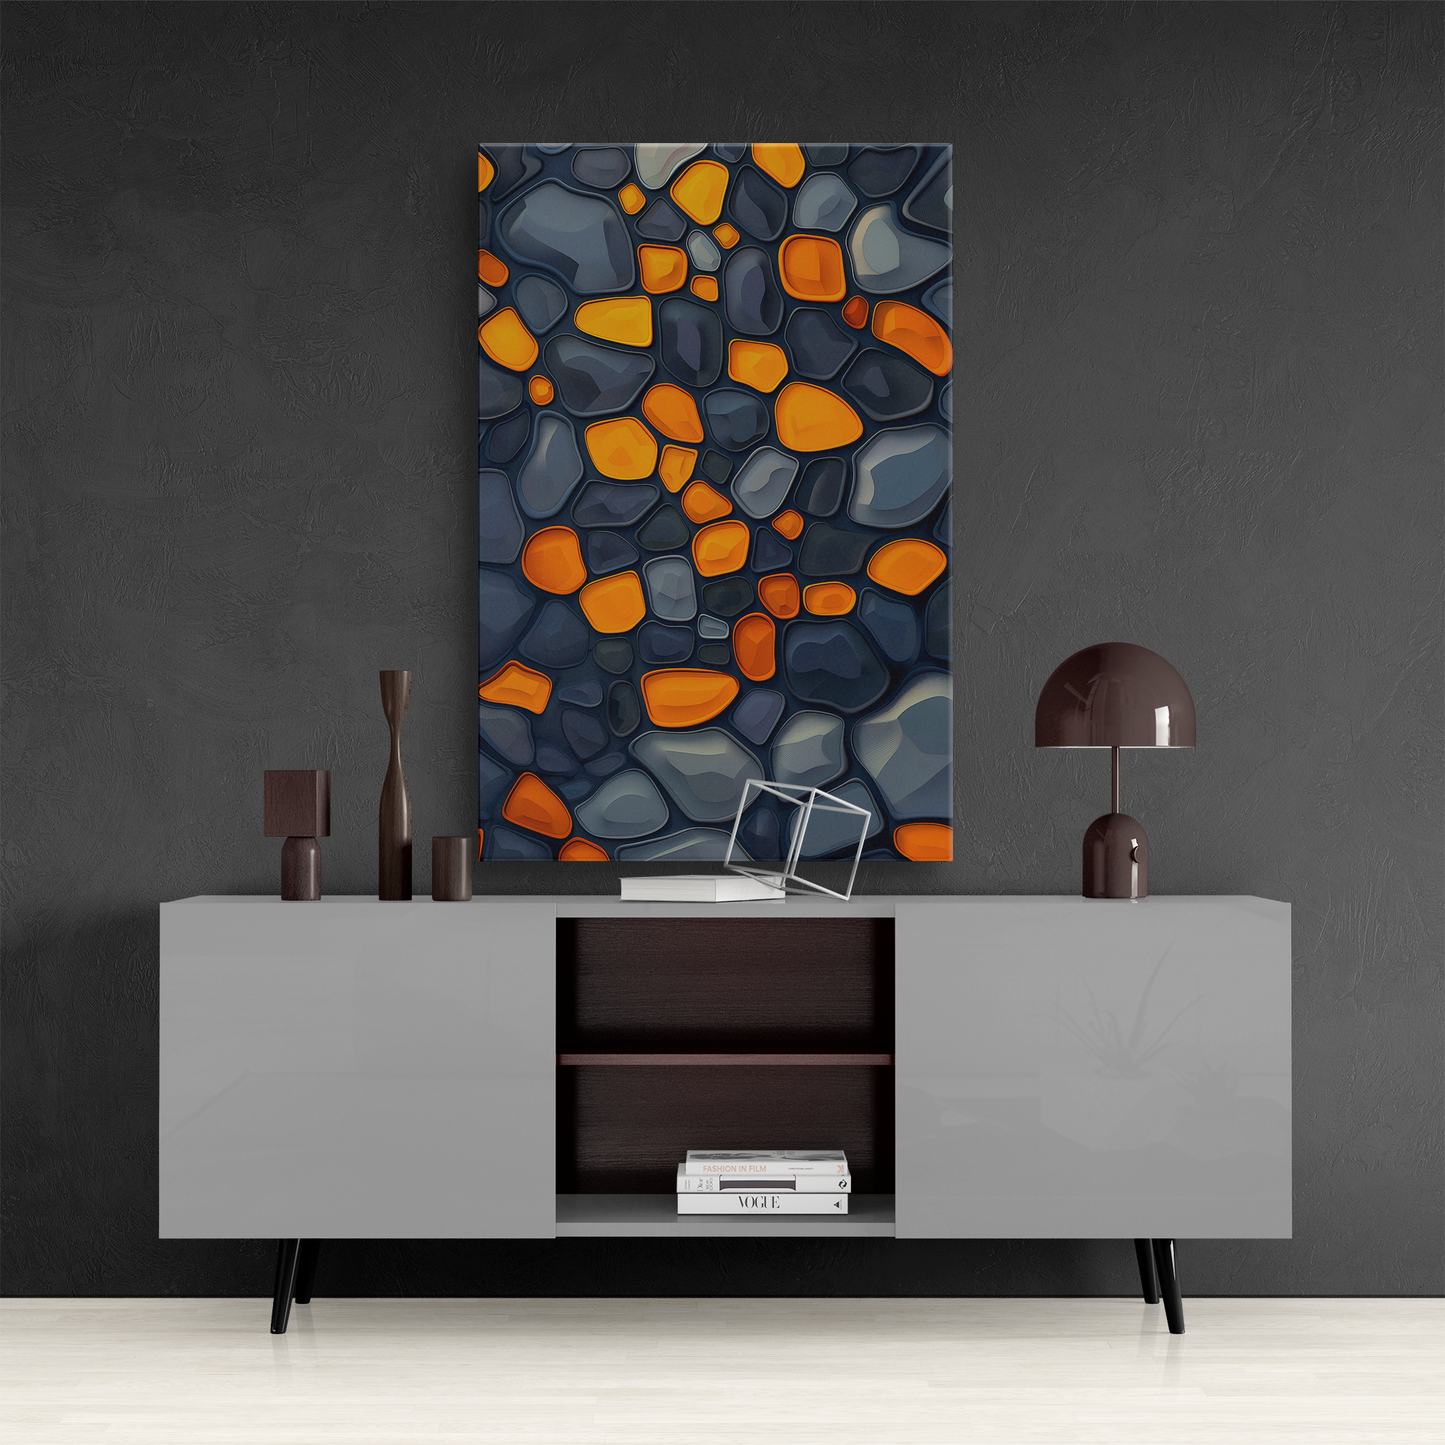 Amber Mosaic (Canvas)Amber Mosaic at RimaGallery, a premium, eco-friendly canvas celebrating quality and sustainability. Elevate your space with vibrant, lasting artRimaGallery